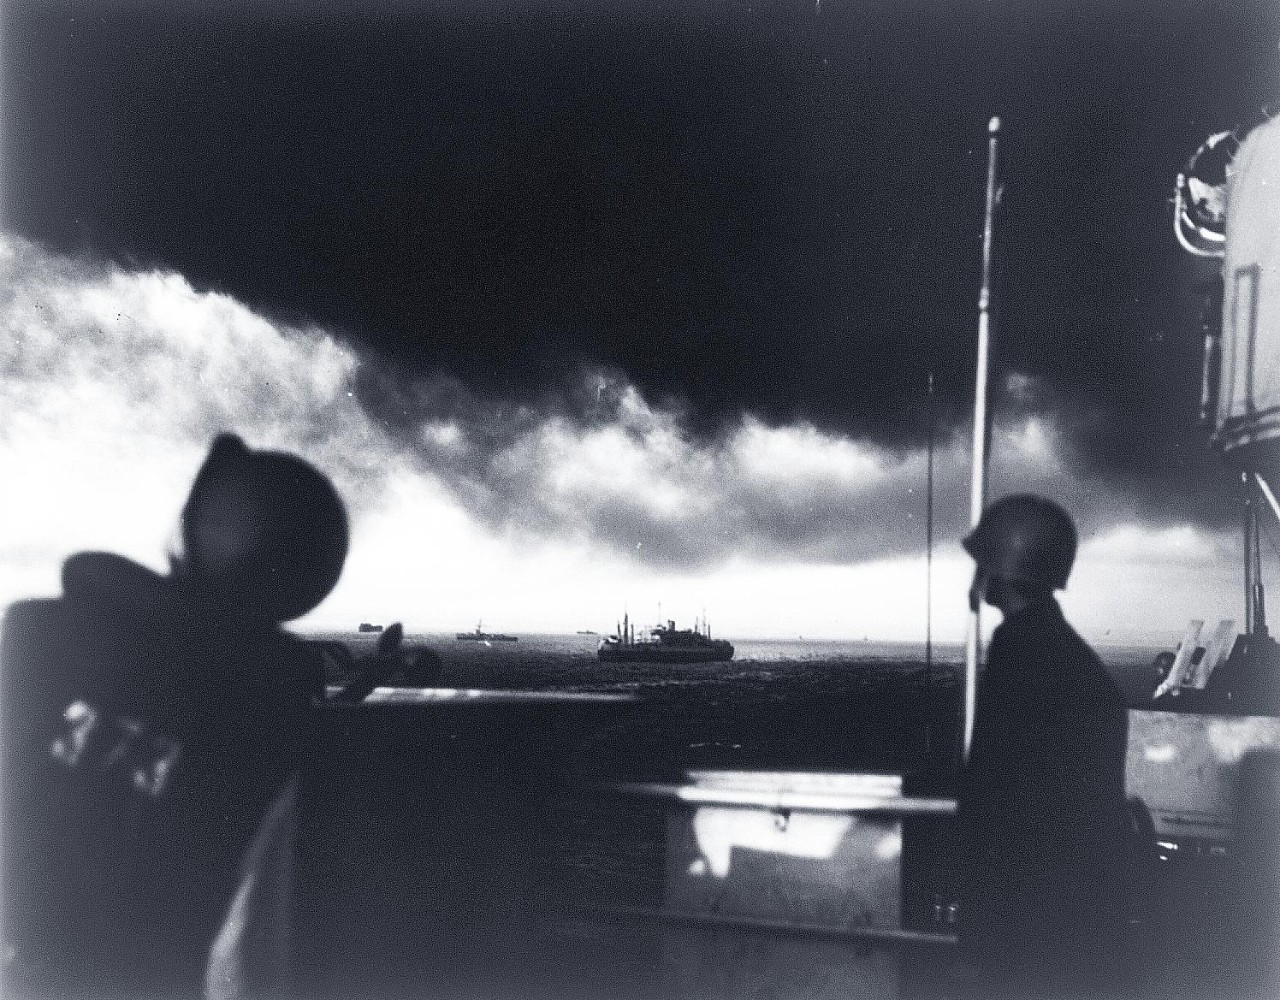 LC-USZ62-80645:   Operation Husky, July-August 1943.  U.S. Coast Guard gunners tensely study the lowering skies for enemy planes as the Coast Guard-manned transport nears Sicily.  Other ships in the invasion armada can be seen off side, July 1943.  U.S. Coast Guard Photograph. Courtesy of the Library of Congress.  (2015/11/13).